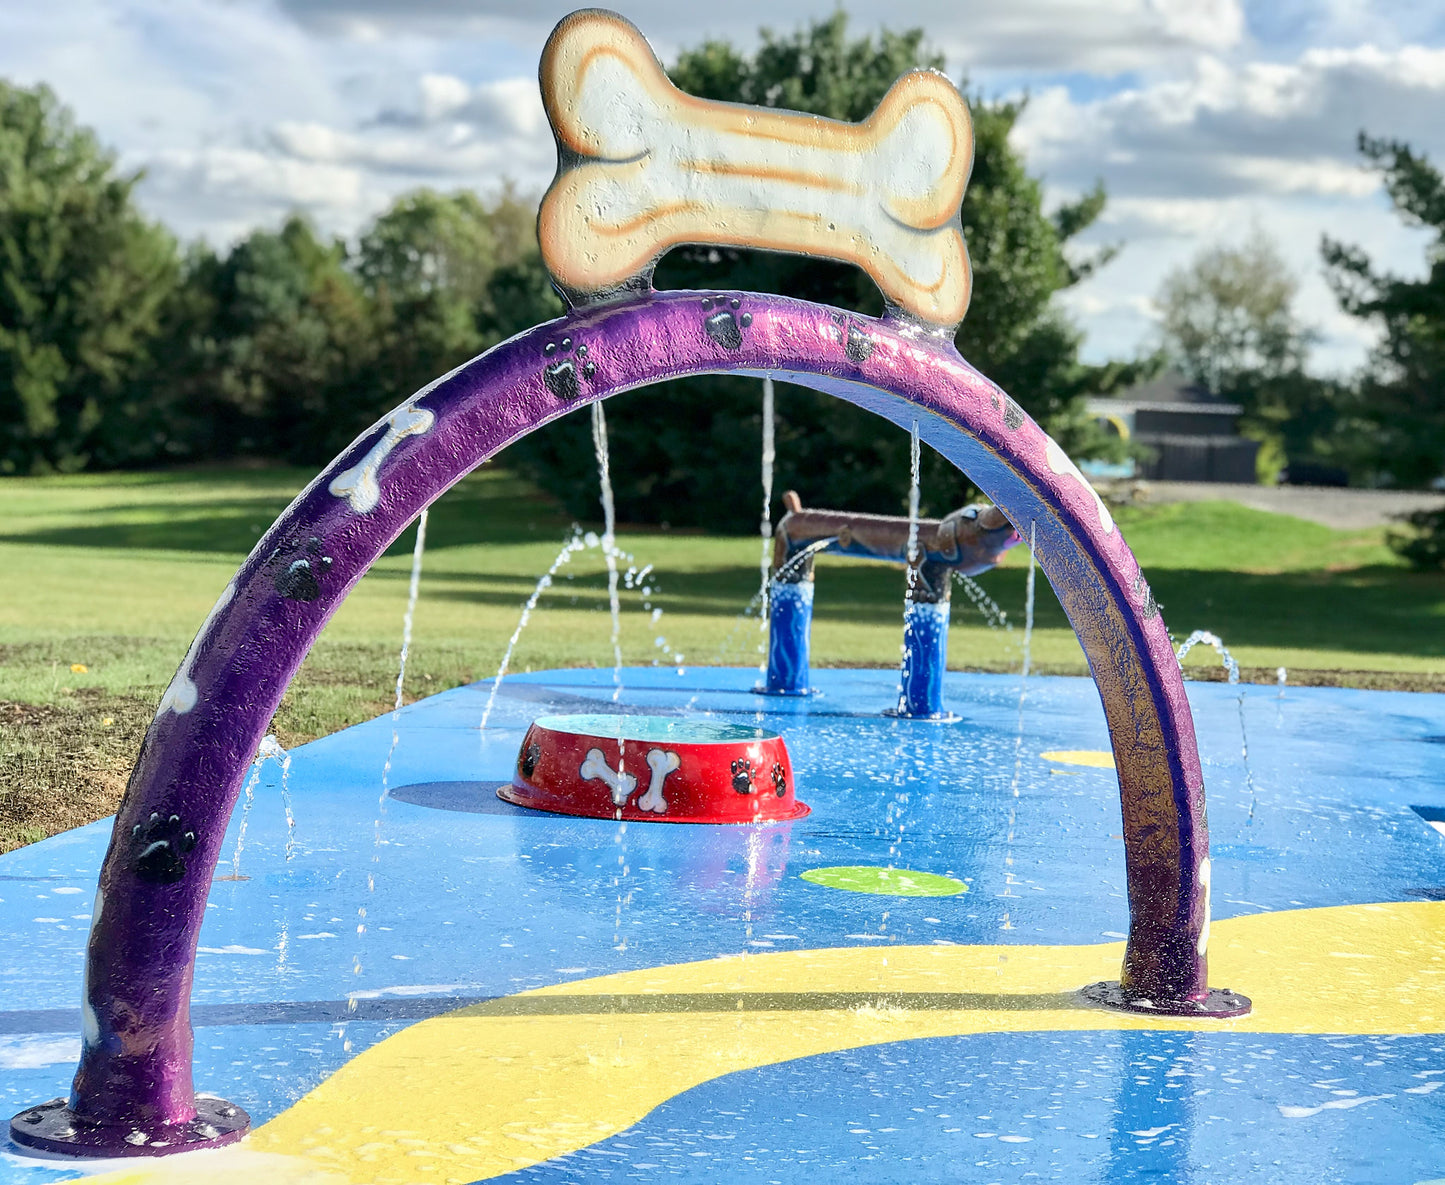 doggy-wash-water-play-feature-made-in-the-usa-by-my-splash-pad-dog-water-park